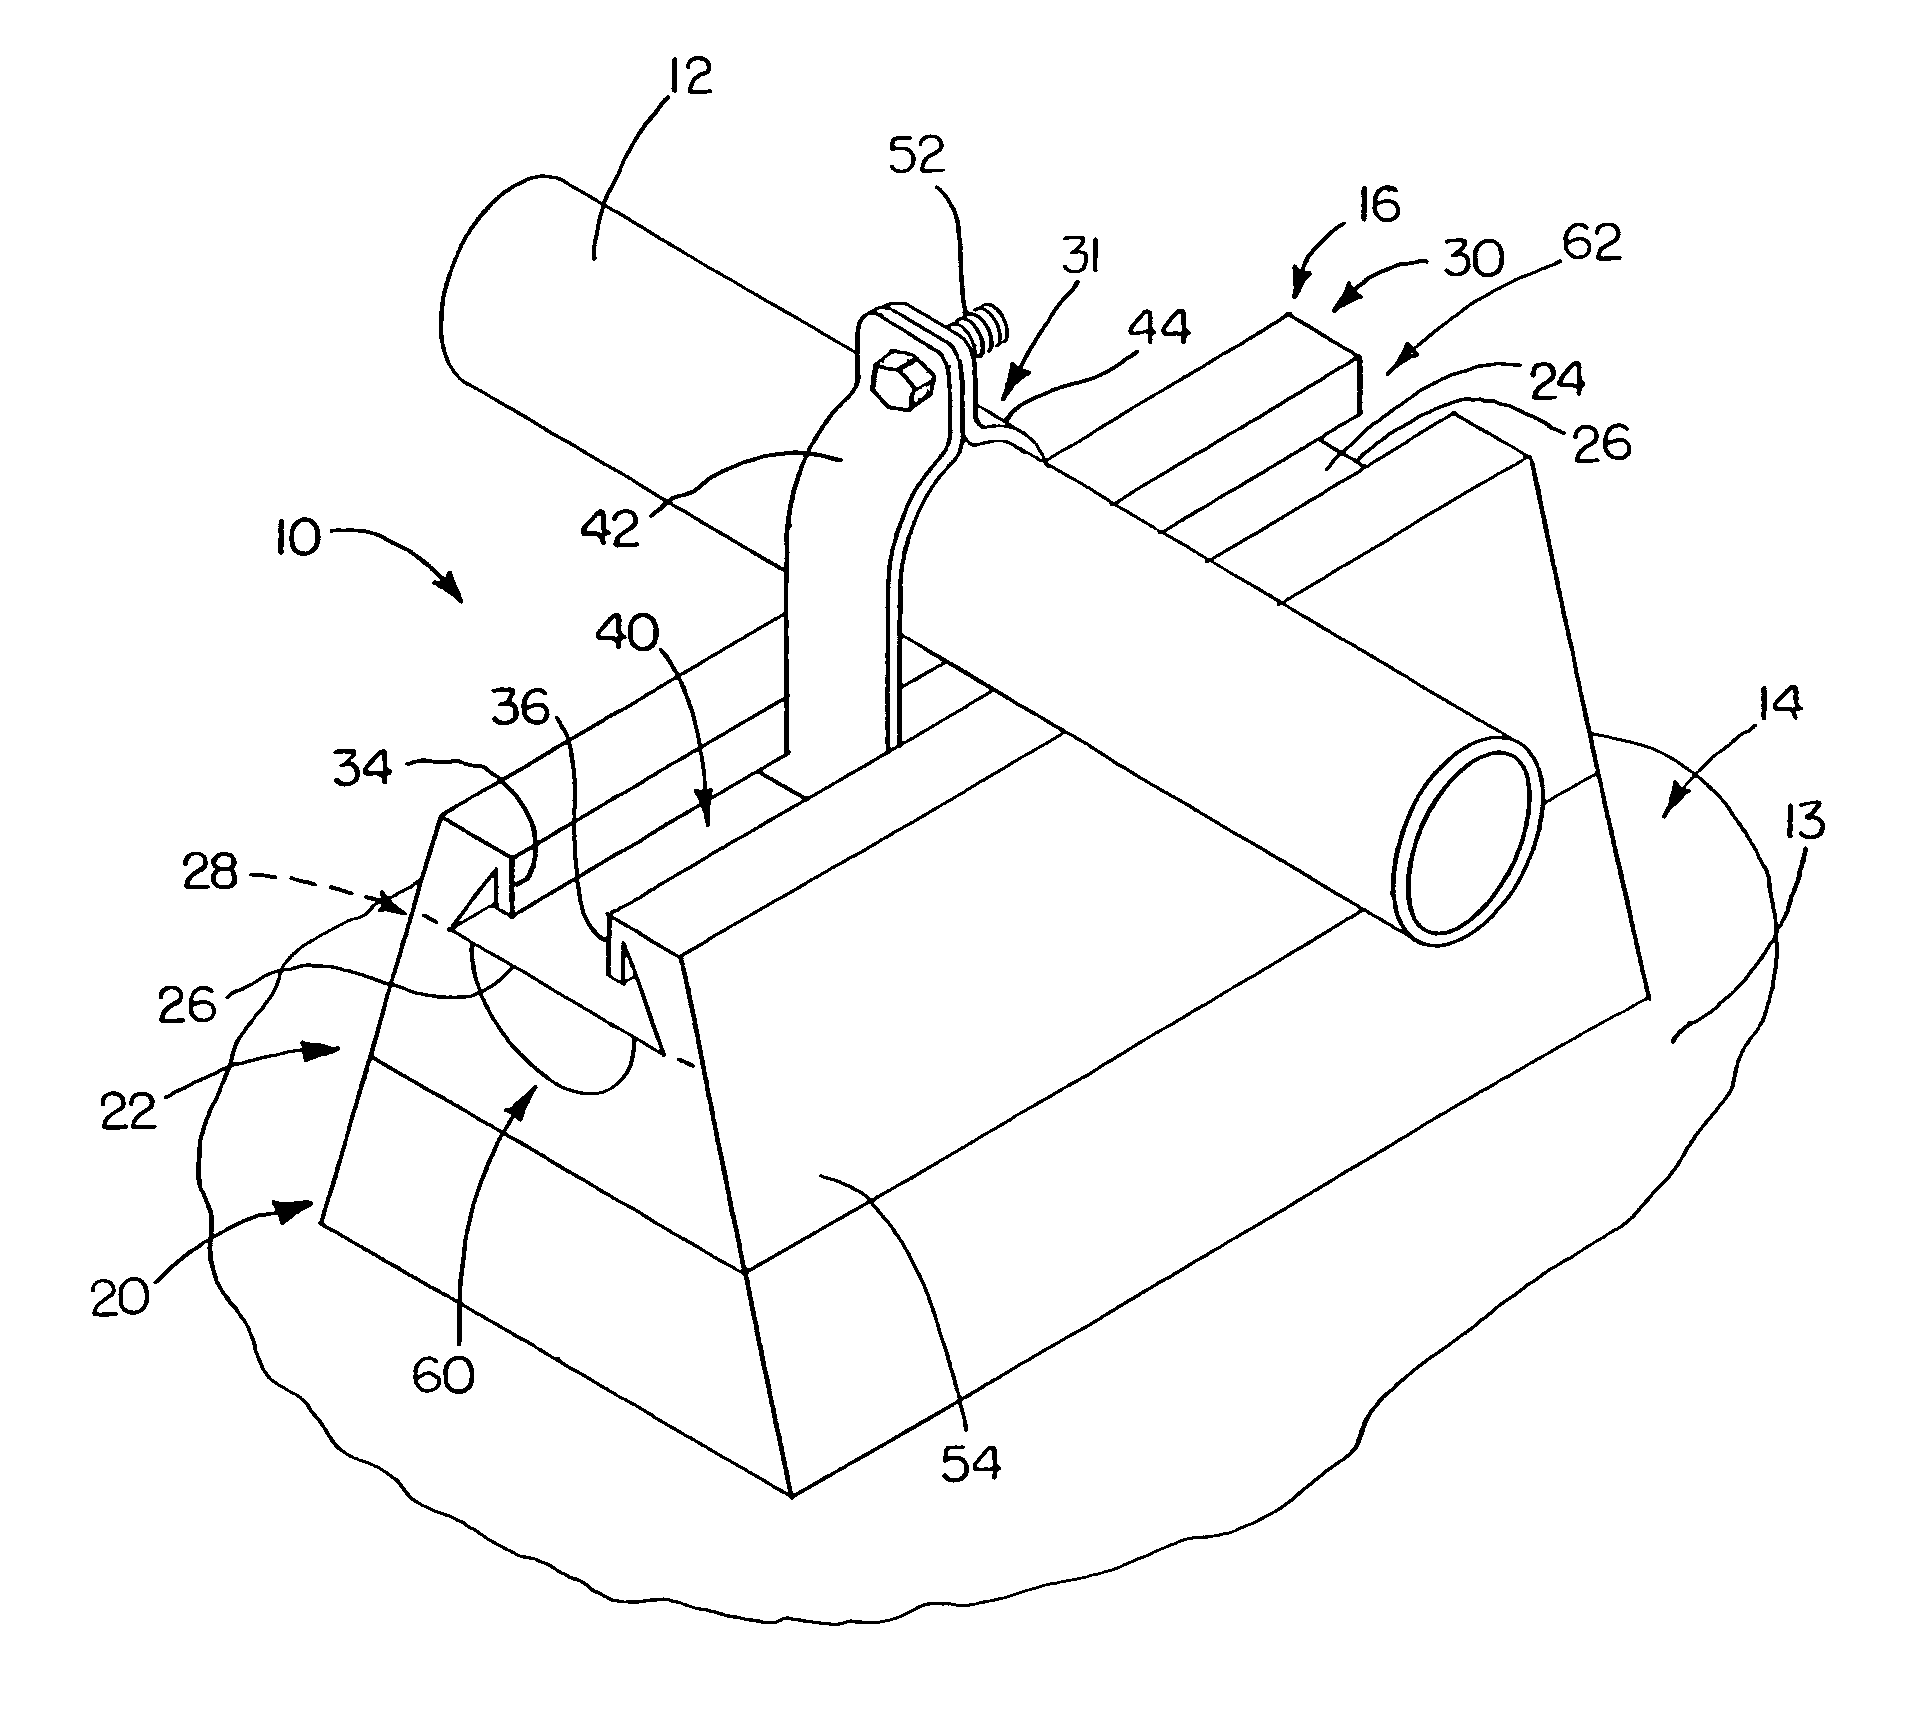 Rooftop equipment support and method of use